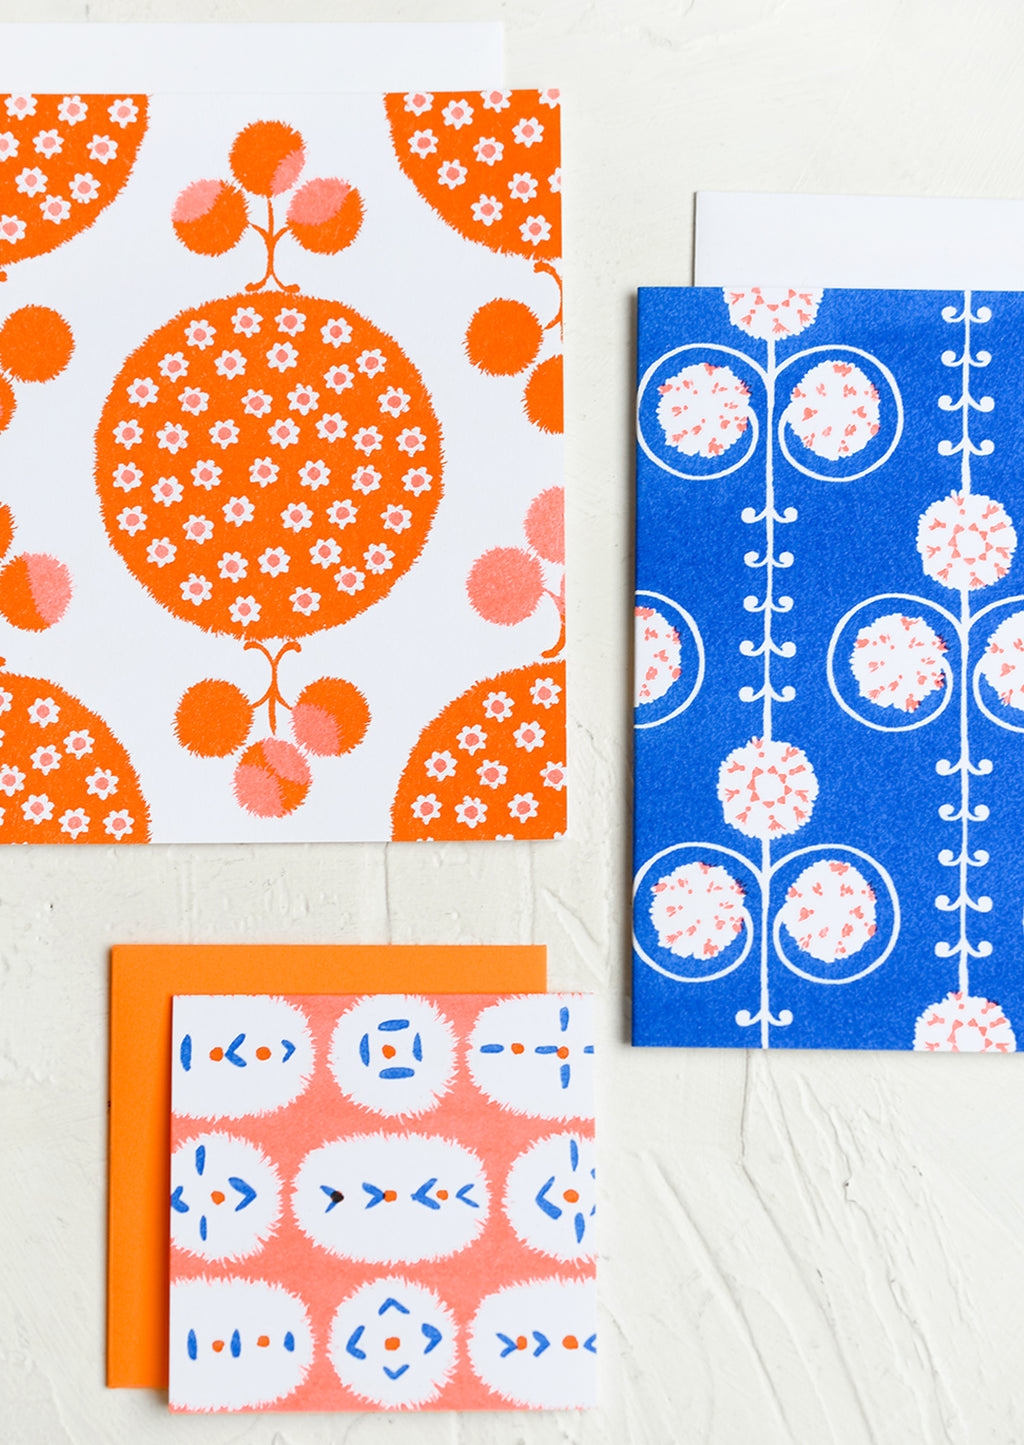 6: A patterned risograph printed card set in cobalt and orange.